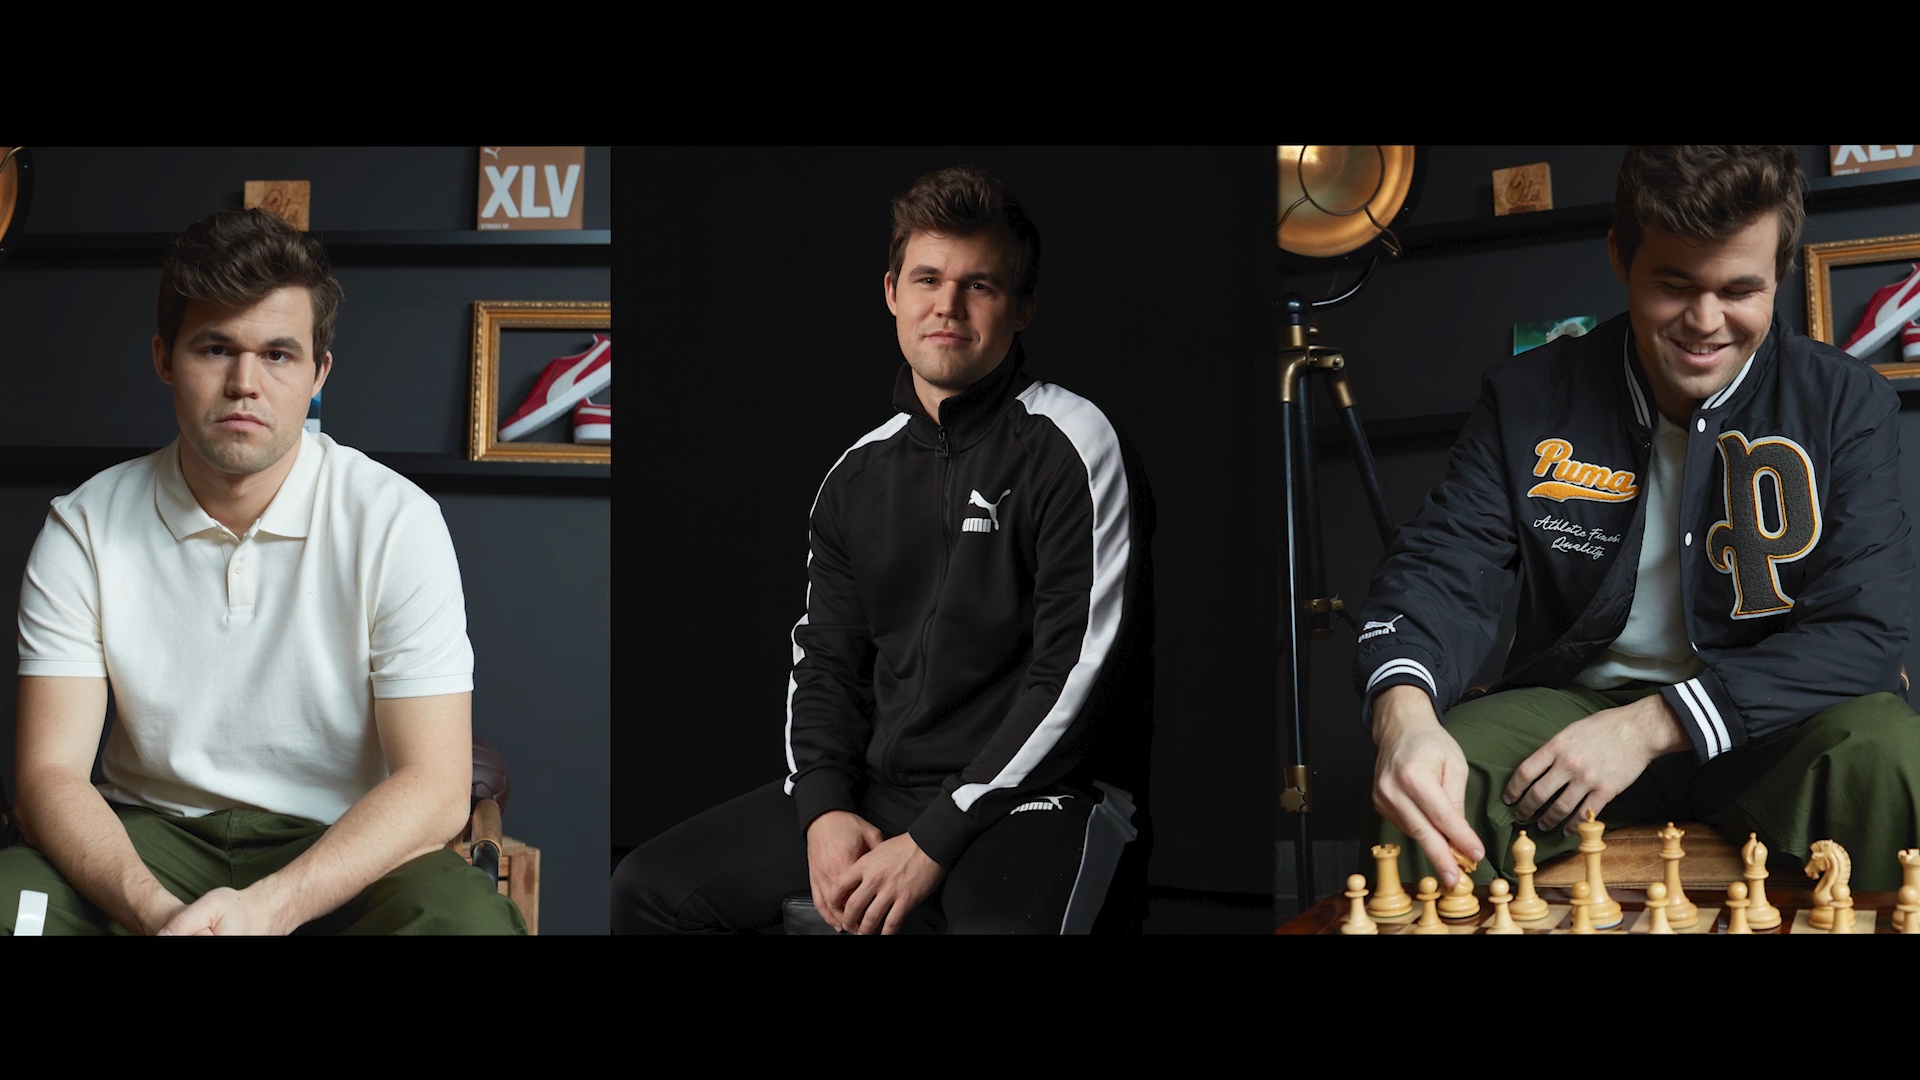 PUMA Ambassador and Norwegian World Chess Champion Magnus Carlsen speaks about his motivation to stay at the highest level in his sports and how he became the highest-rated player in history, in a video interview with sports company PUMA. (Photographer/Videographer: Pelle Lannefors)